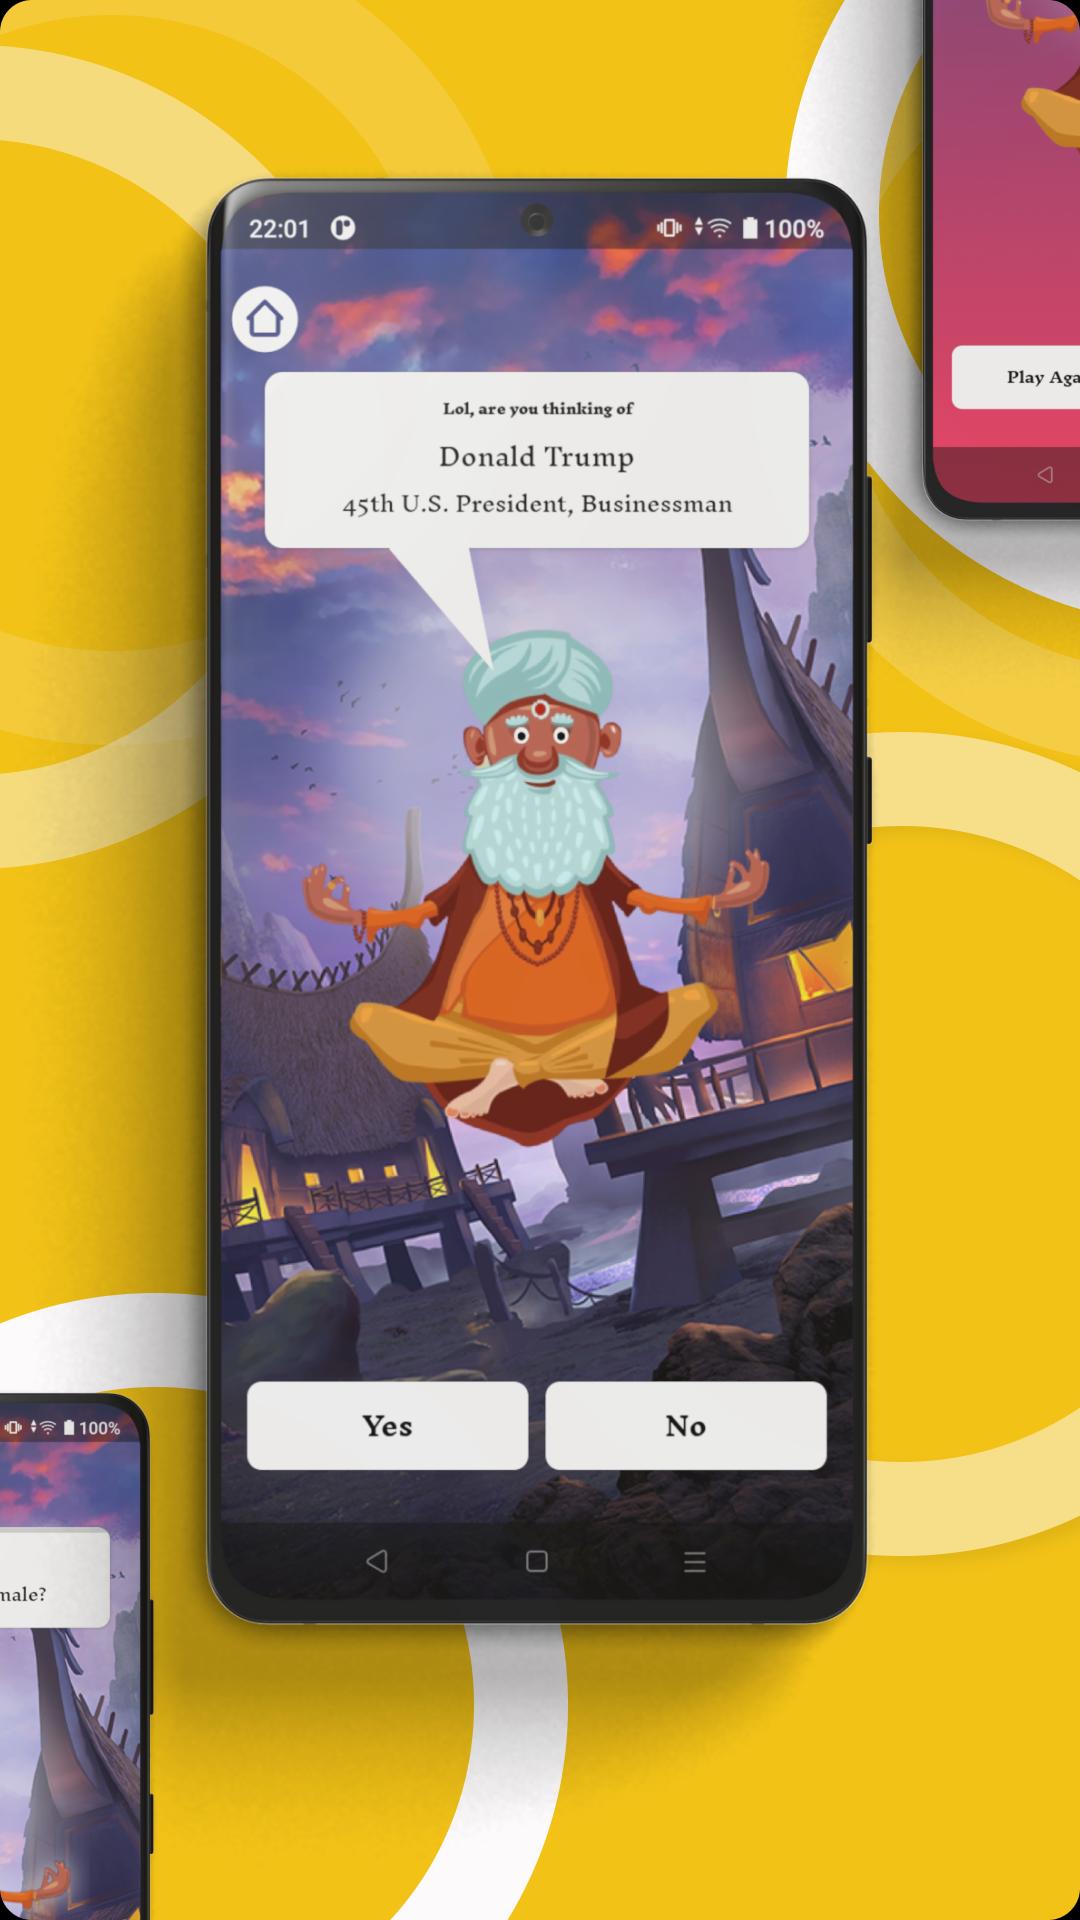 The Akinator: Download and Play for Free on PC with Friends